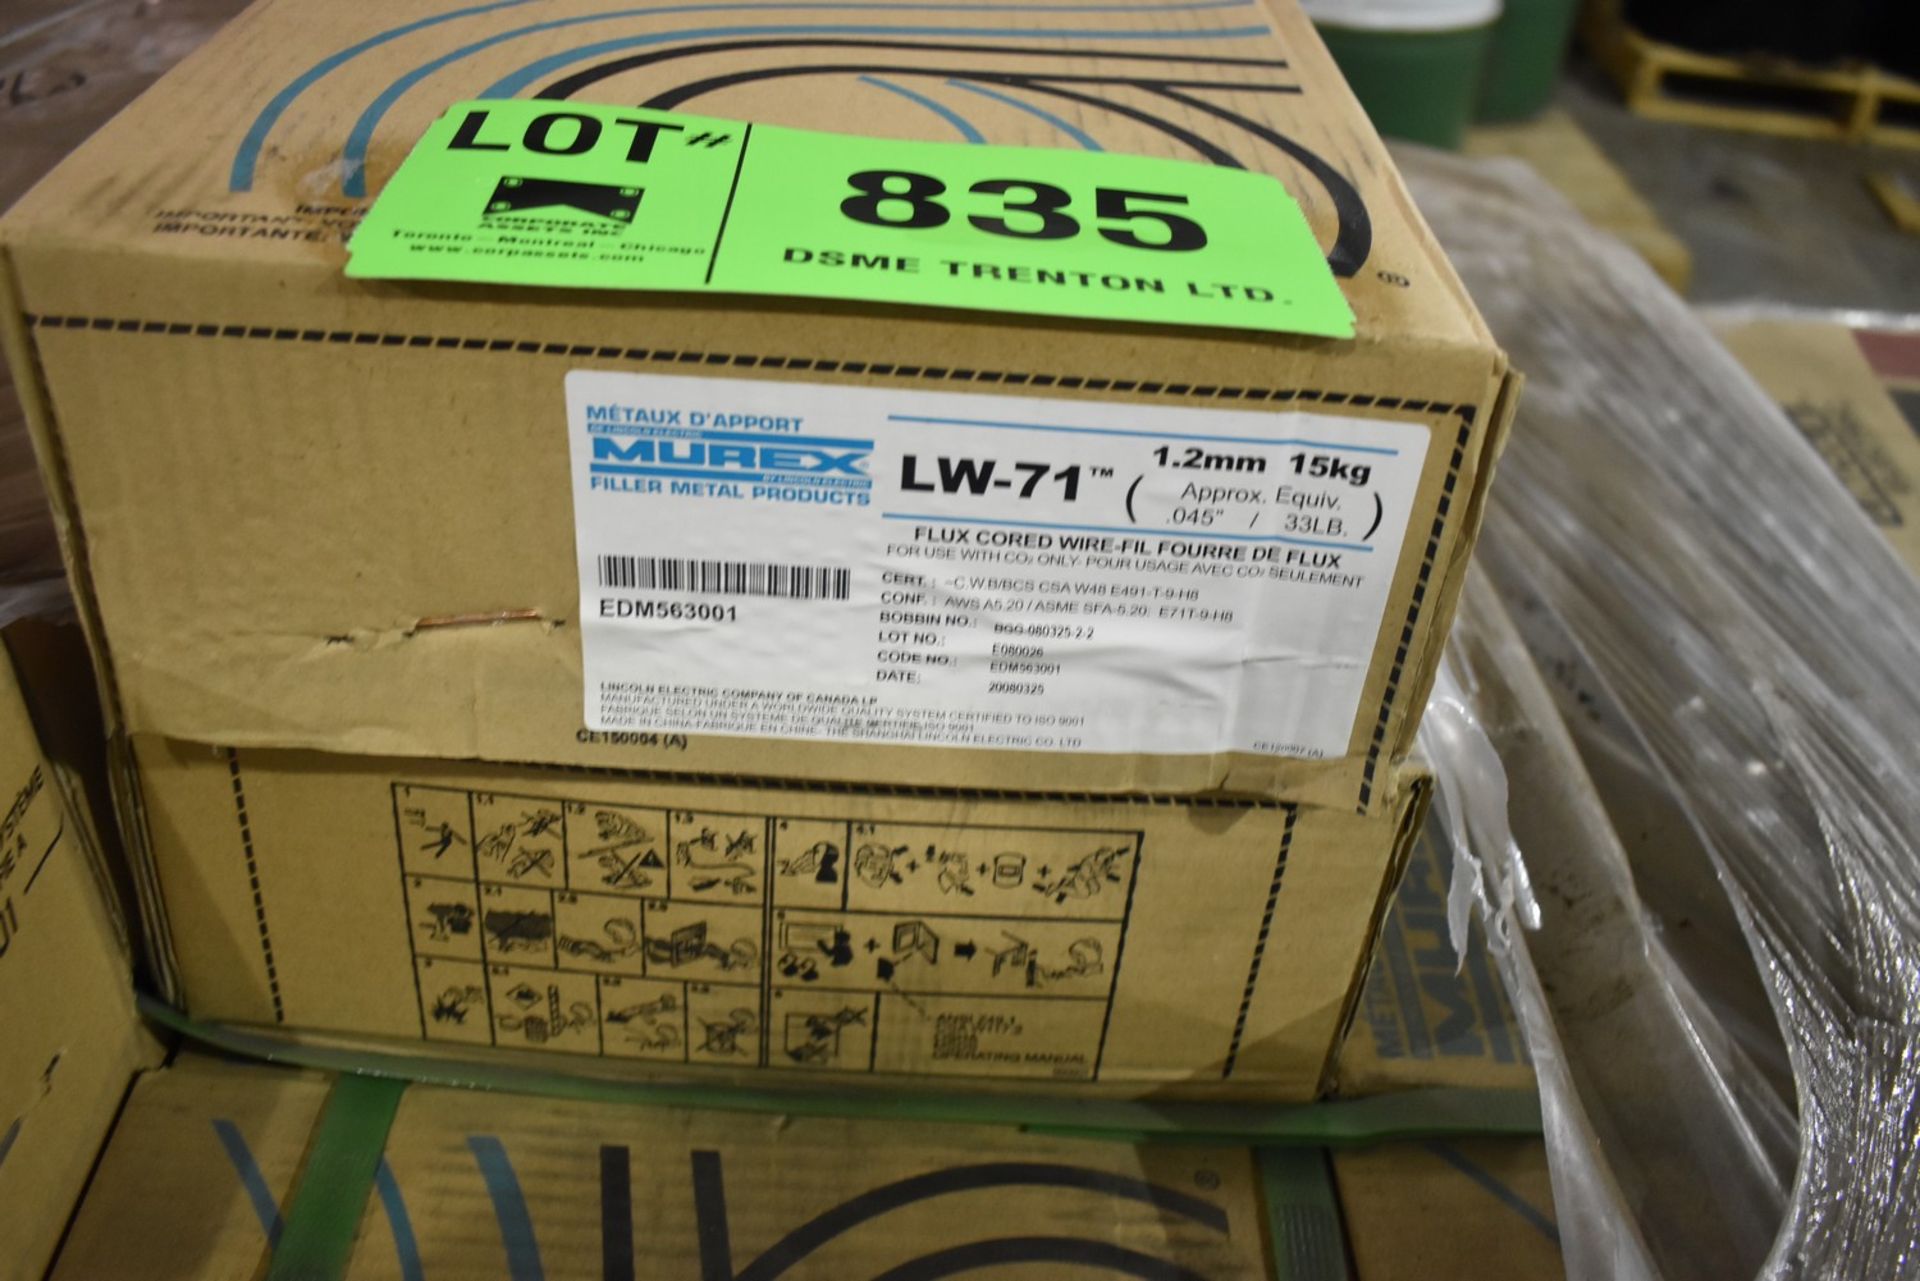 LOT/ PALLET OF MUREX LINCOLN ELECTRIC .045"/1.2MM WELDING WIRE BRAND NEW SEALED CONTAINERS - Image 2 of 2